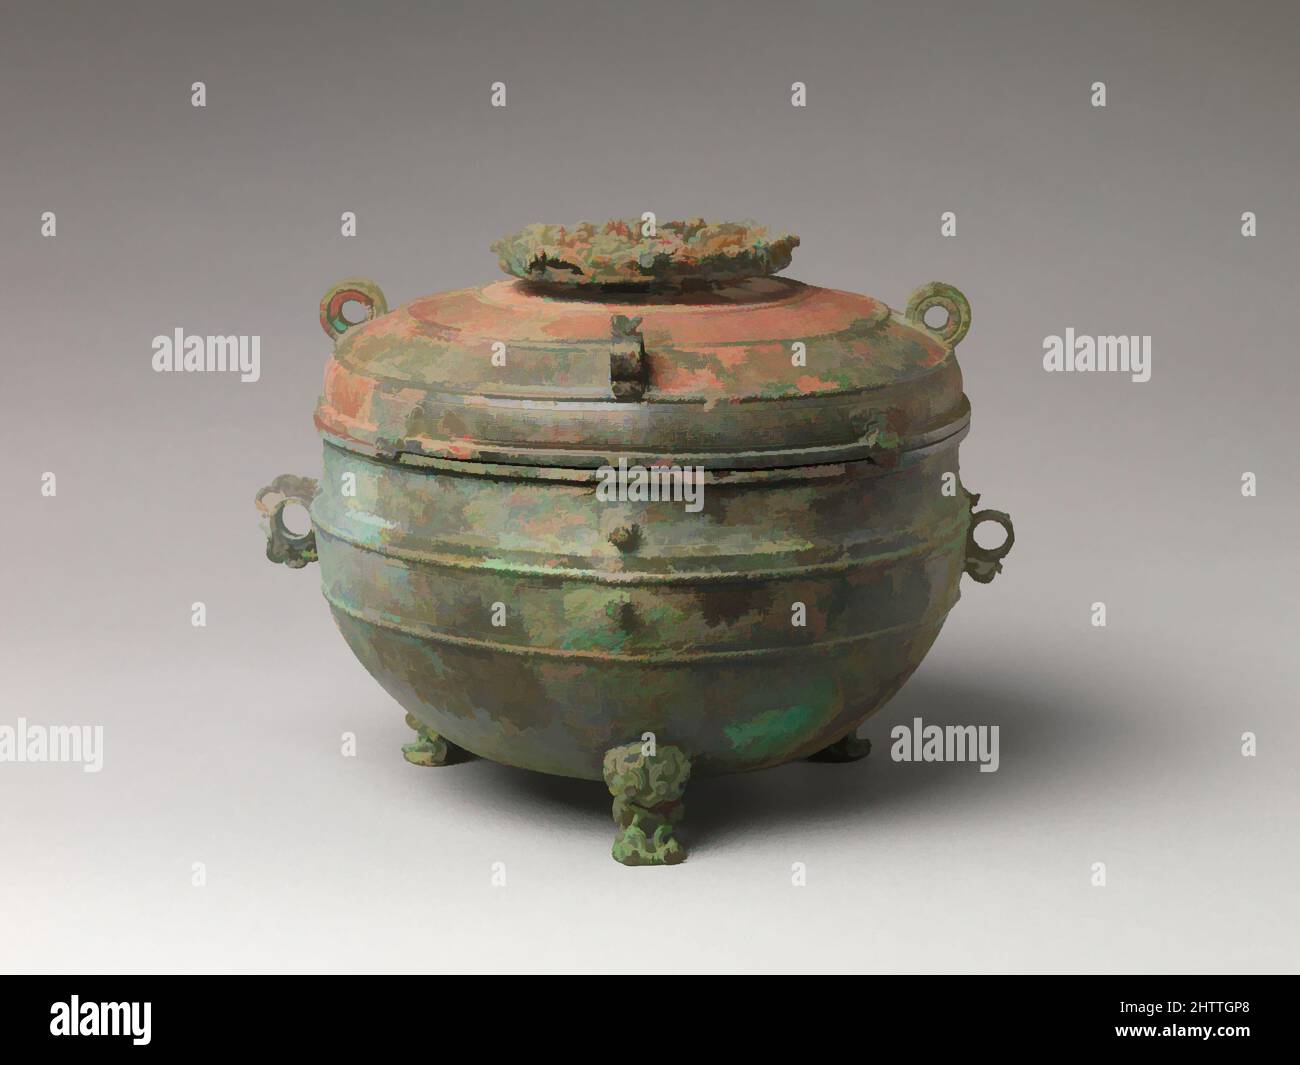 Art inspired by 春秋 青銅敦, Grain Vessel (Dui), Eastern Zhou dynasty, Spring and Autumn period (770–476 B.C.), early 6th century B.C., China, Bronze, H. 8 in. (20.3 cm); Diam. 10 5/8 in. (27 cm), Metalwork, Classic works modernized by Artotop with a splash of modernity. Shapes, color and value, eye-catching visual impact on art. Emotions through freedom of artworks in a contemporary way. A timeless message pursuing a wildly creative new direction. Artists turning to the digital medium and creating the Artotop NFT Stock Photo